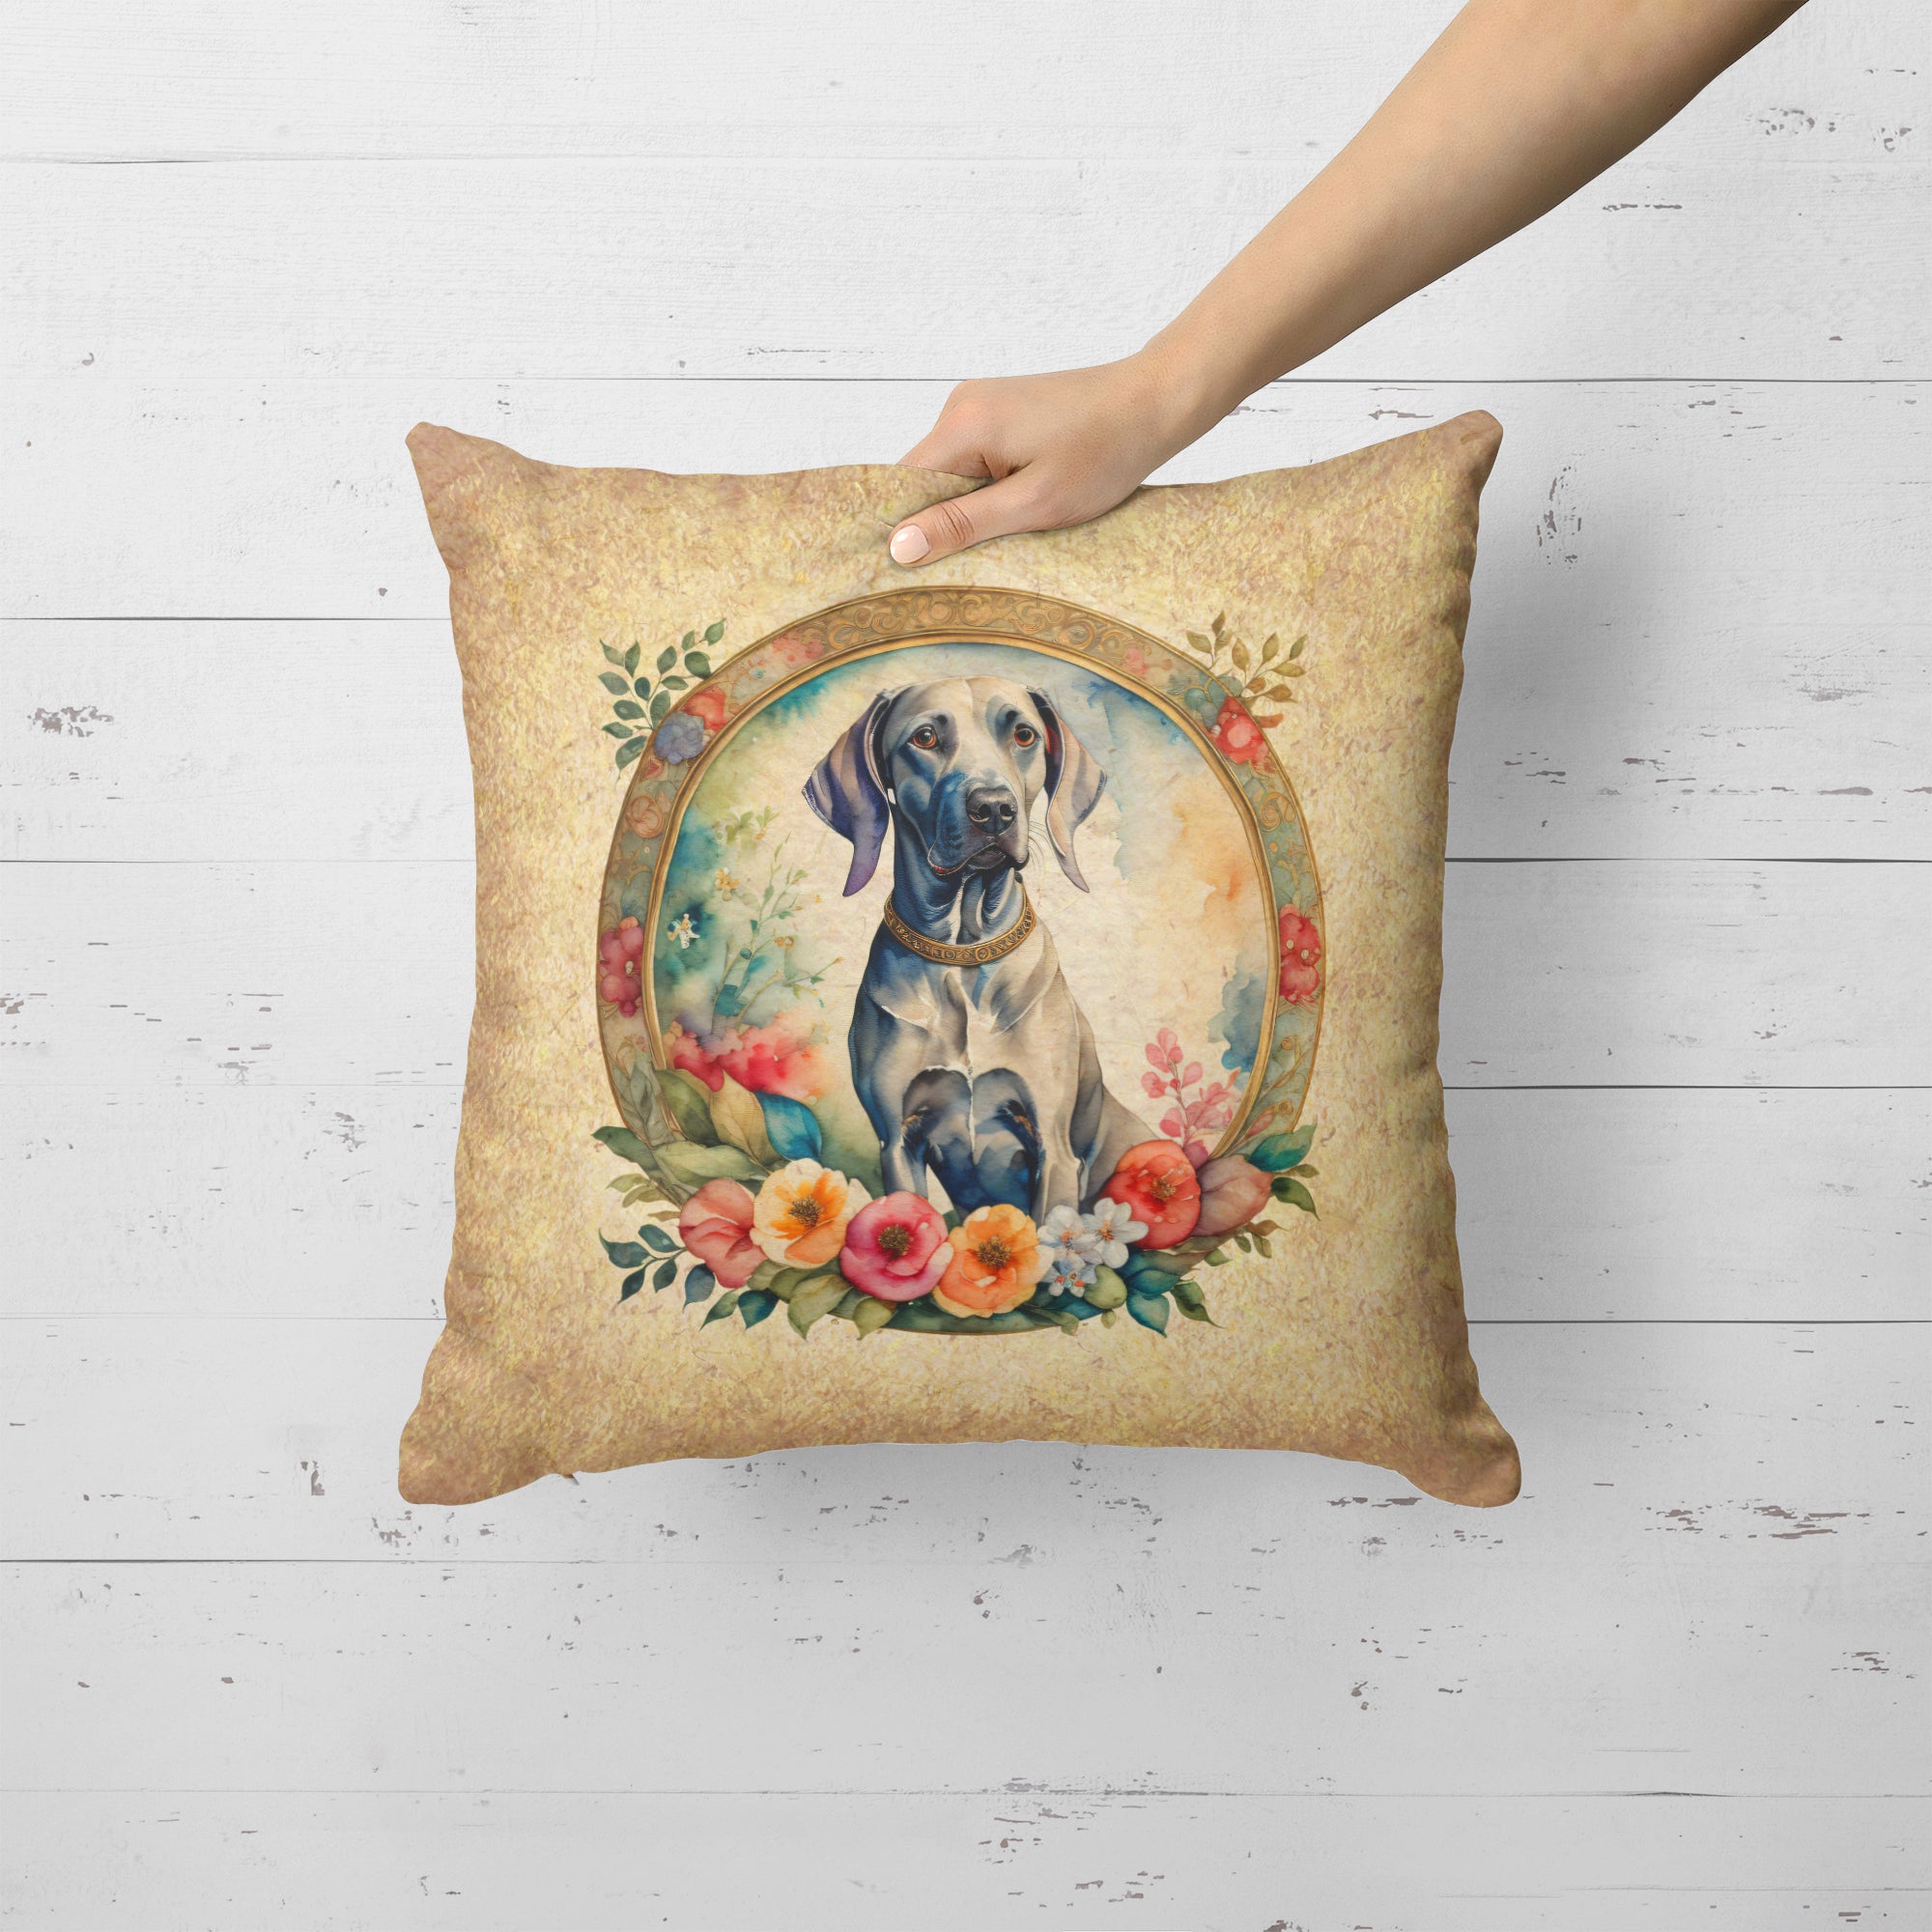 Buy this Weimaraner and Flowers Fabric Decorative Pillow